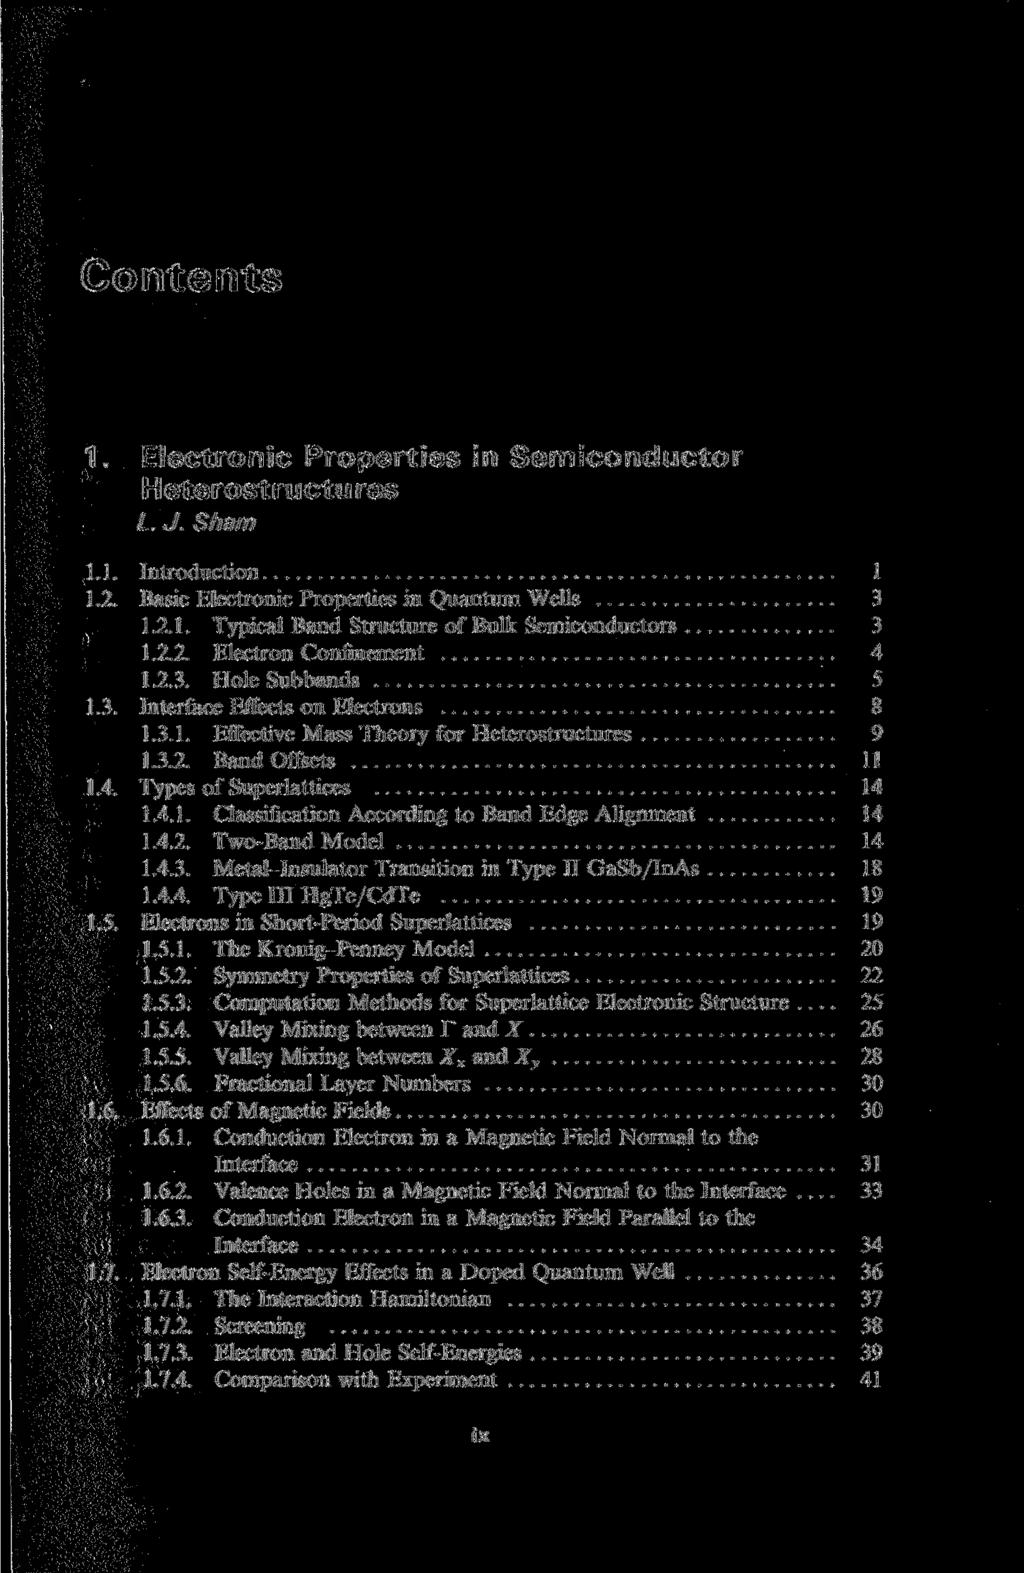 1. Electronic Properties in Semiconductor Heterostructures L. J. Sham 1.1. Introduction 1 1.2. Basic Electronic Properties in Quantum Wells 3 1.2.1. Typical Band Structure of Bulk Semiconductors 3 1.